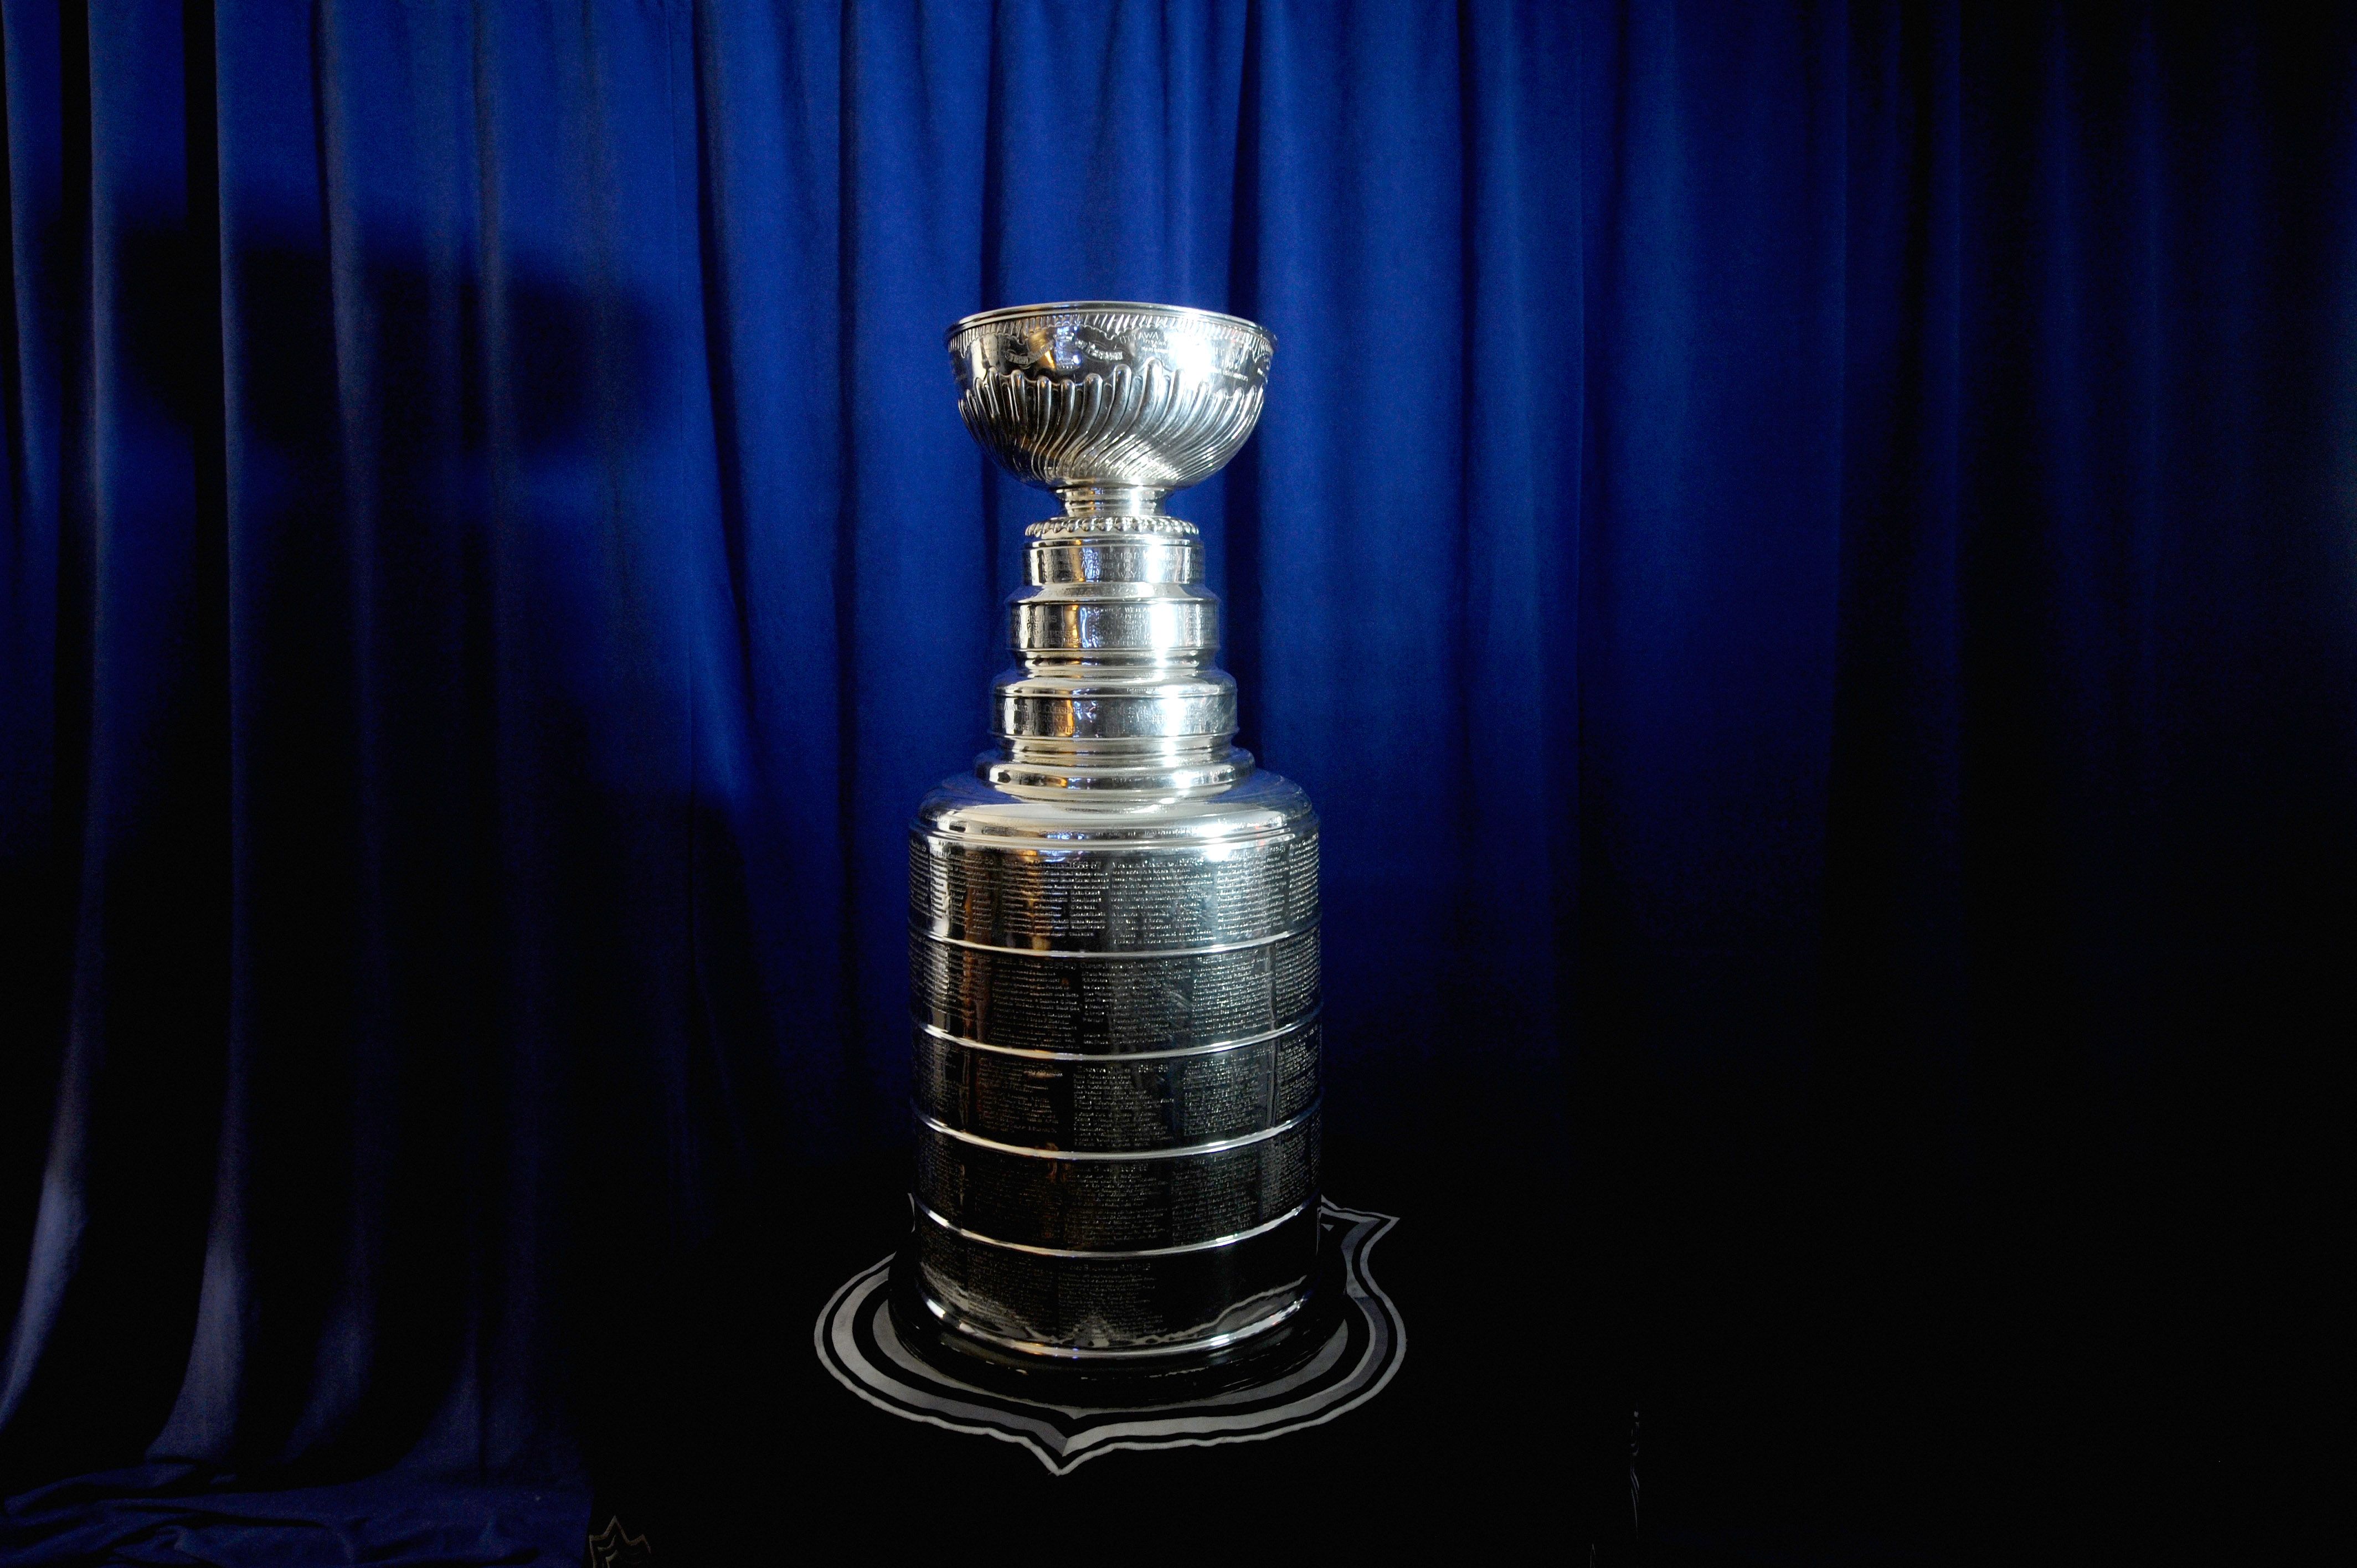 PHOTO: Defending champion Blackhawks engraved on Stanley Cup